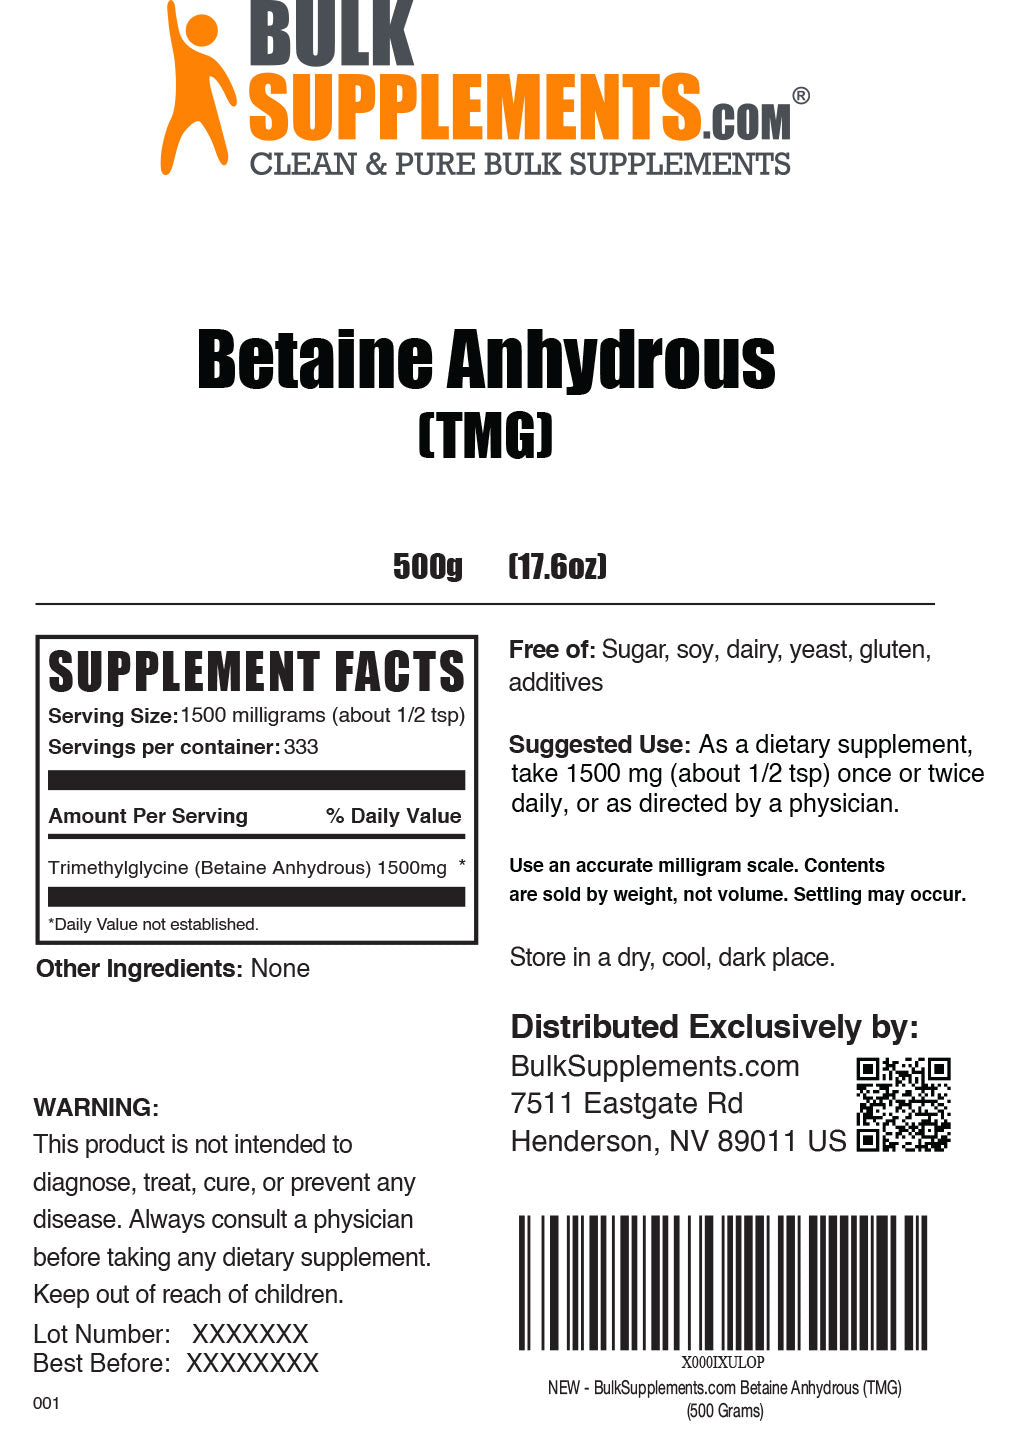 Betaine Anhydrous 500g label